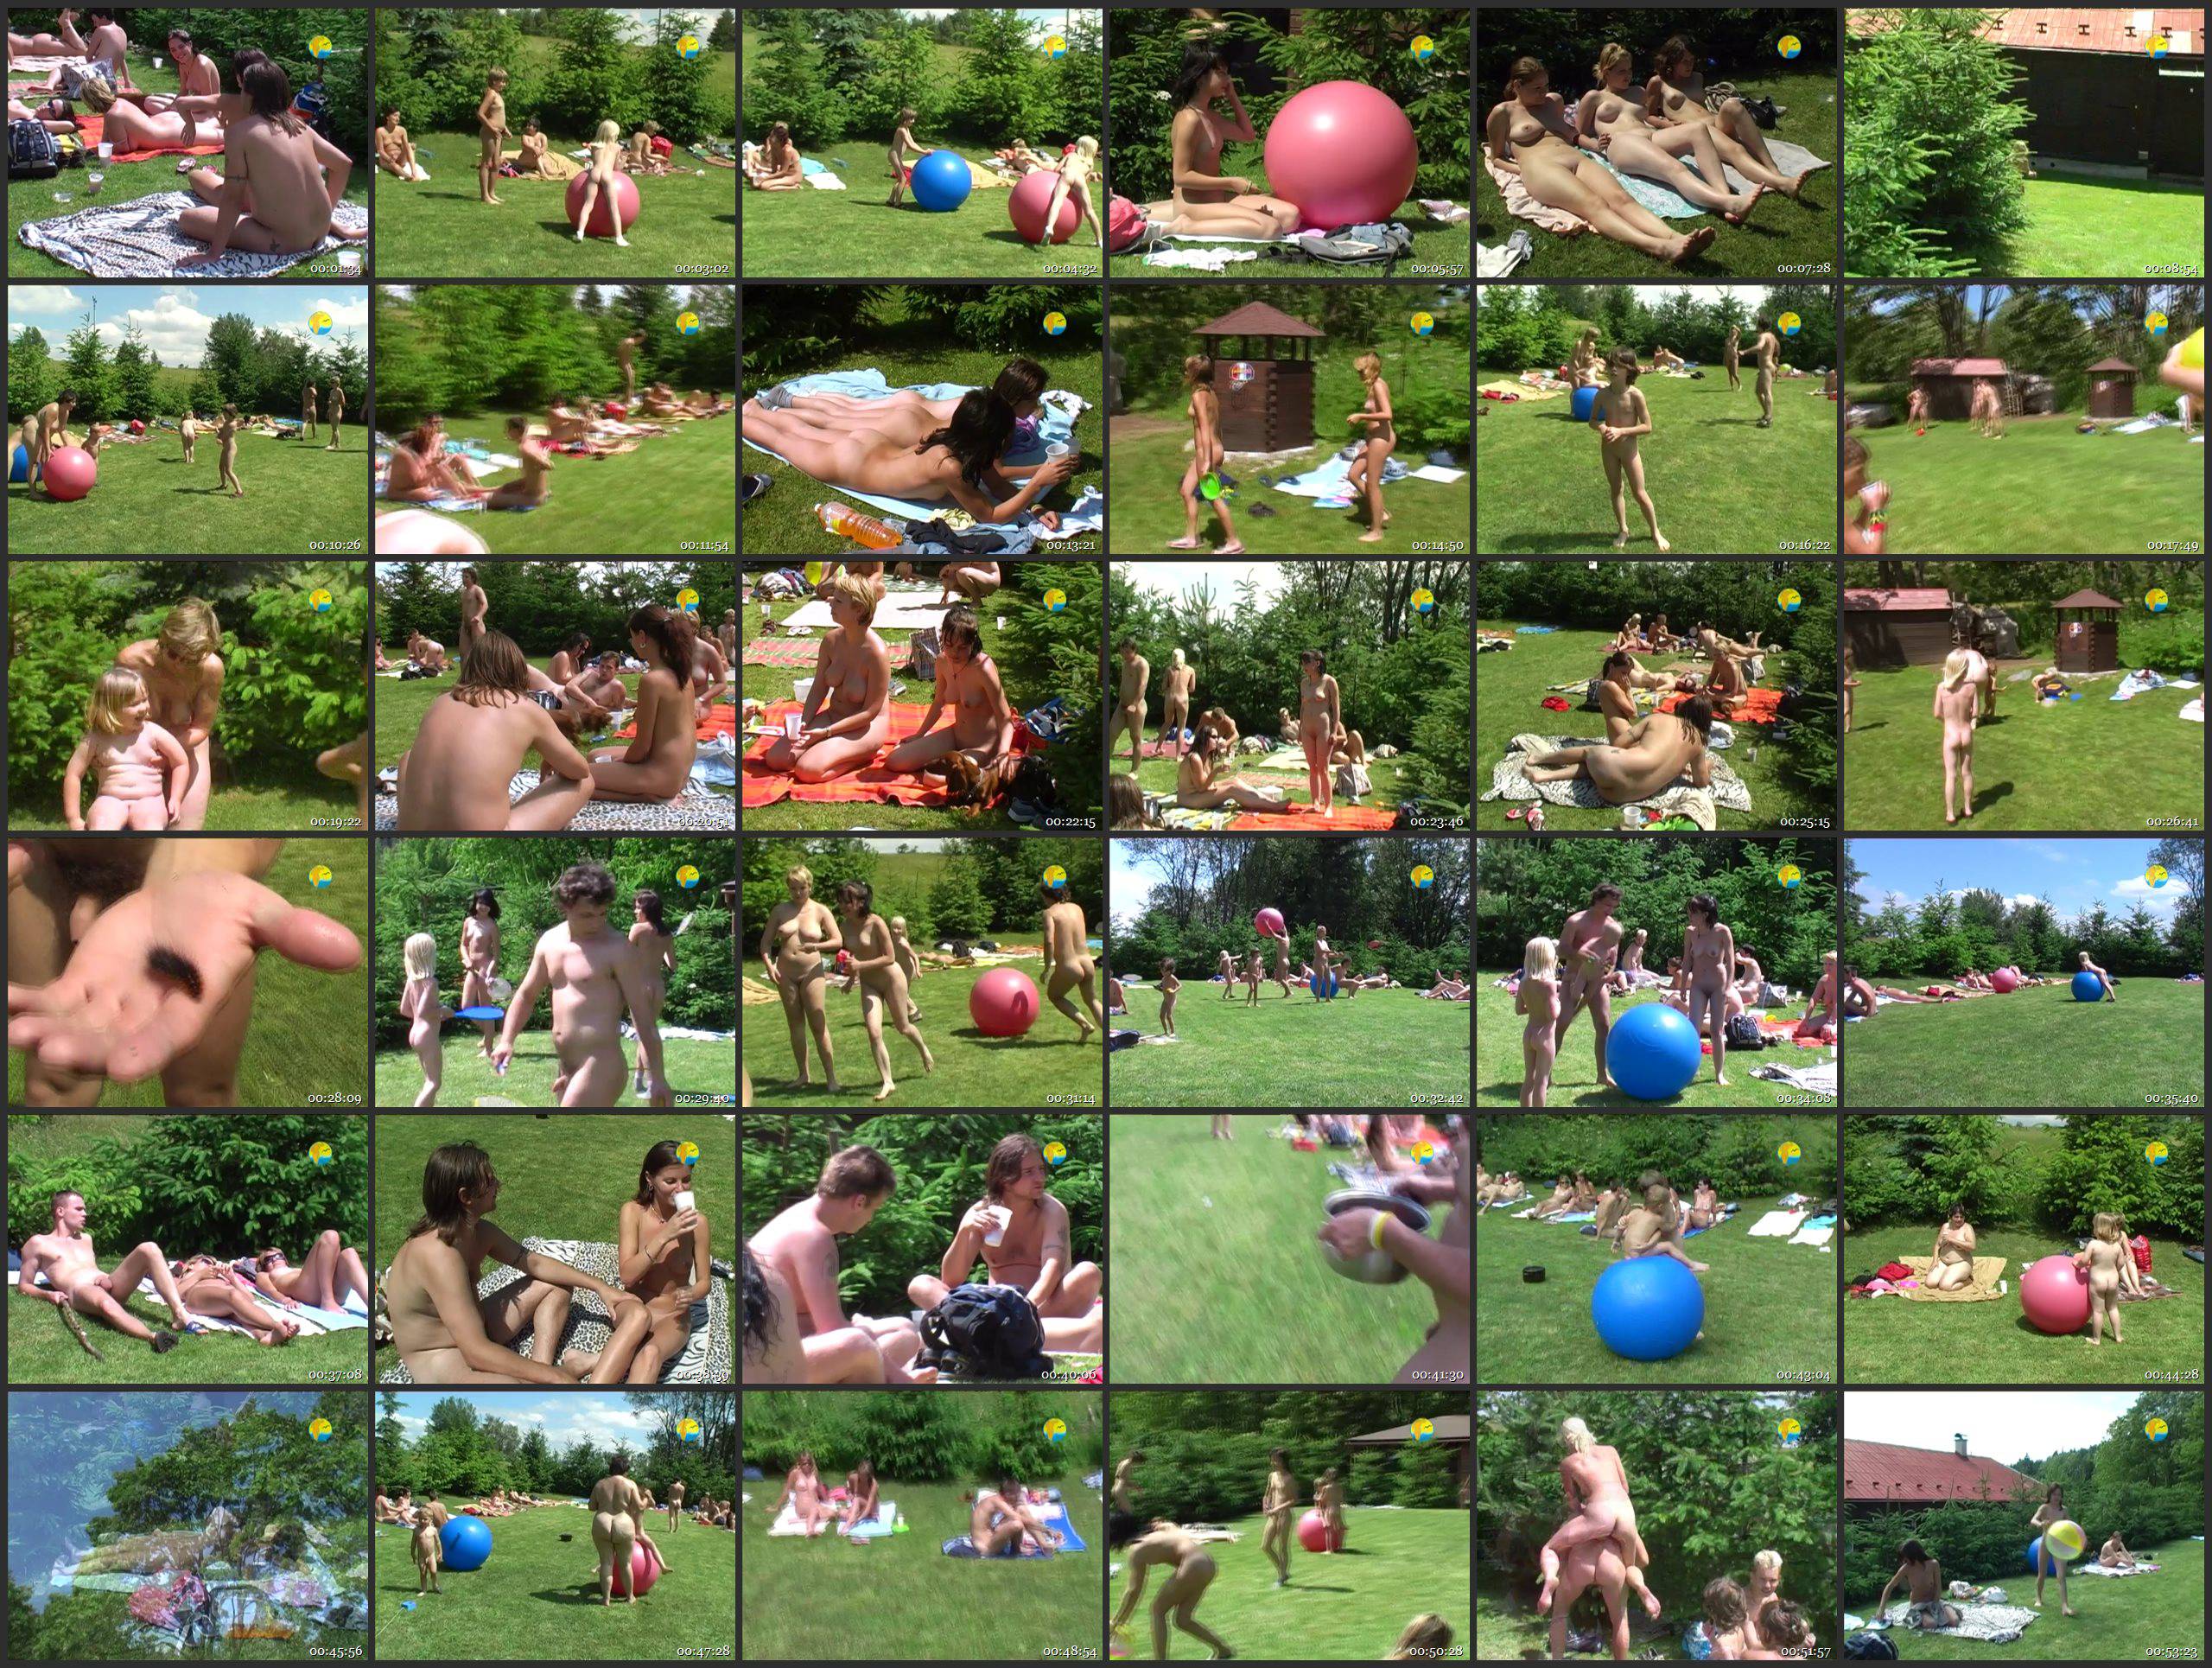 Naturist Freedom Videos-You can never get enough Sunbathing - Thumbnails